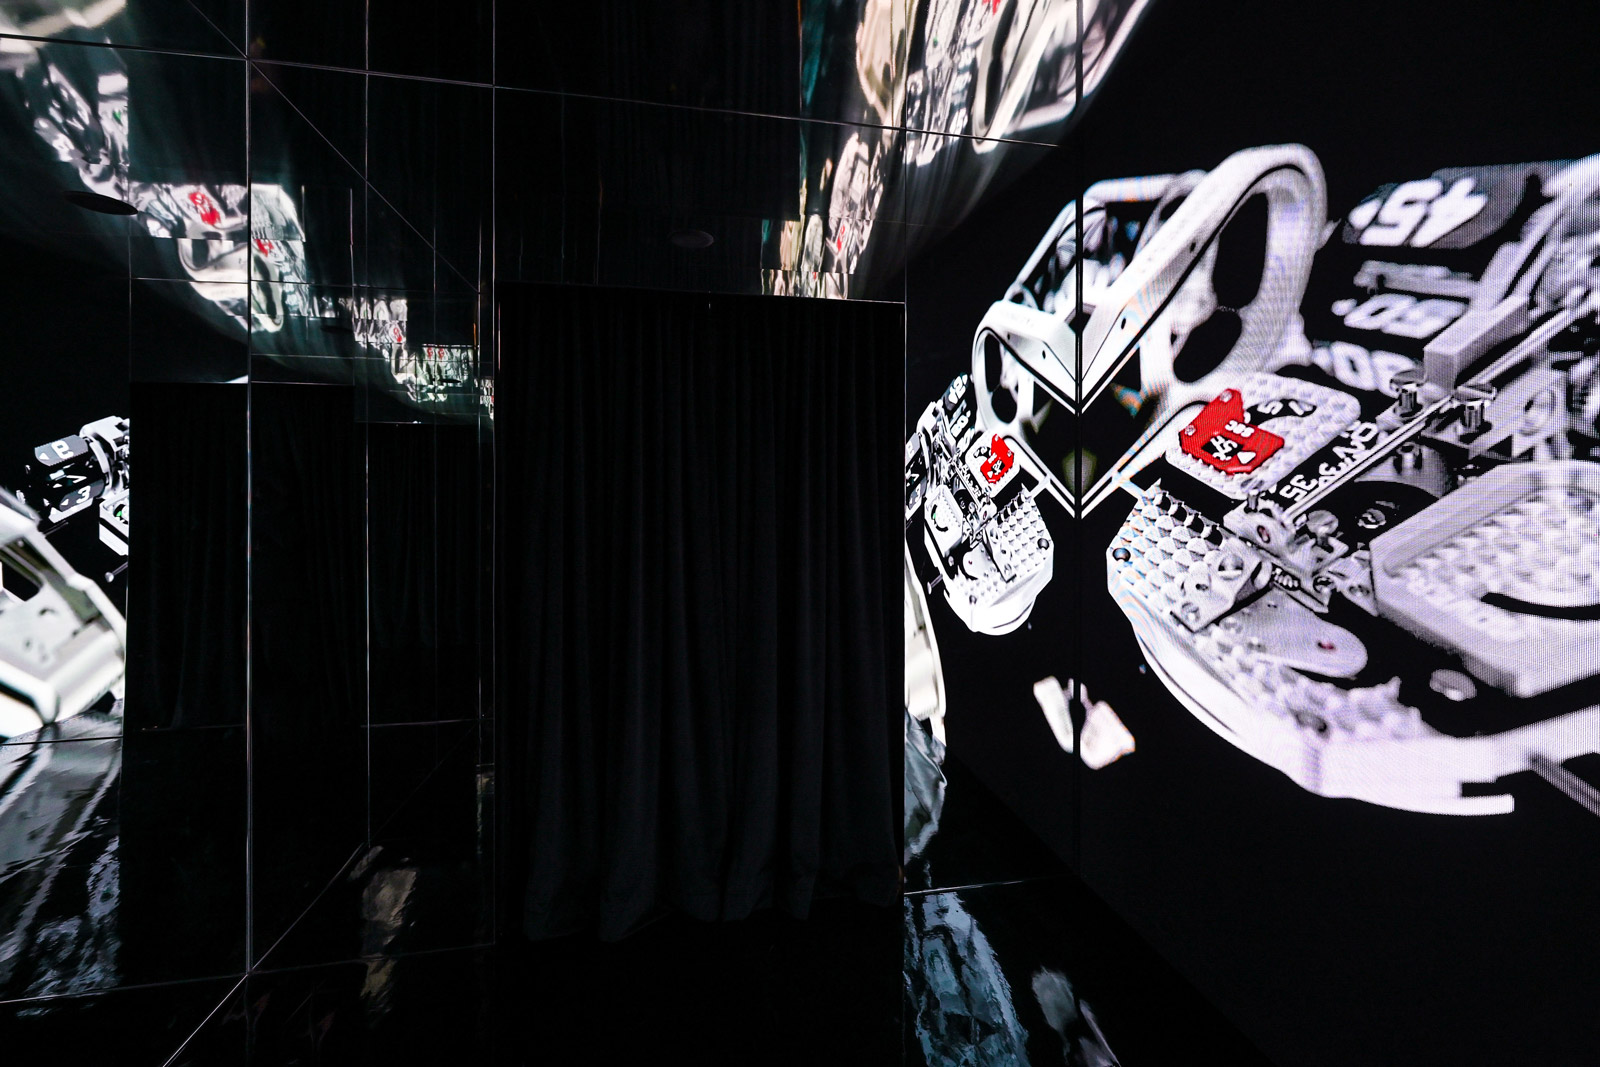 Exhibition: Urwerk 'Every Moment Counts' in Singapore